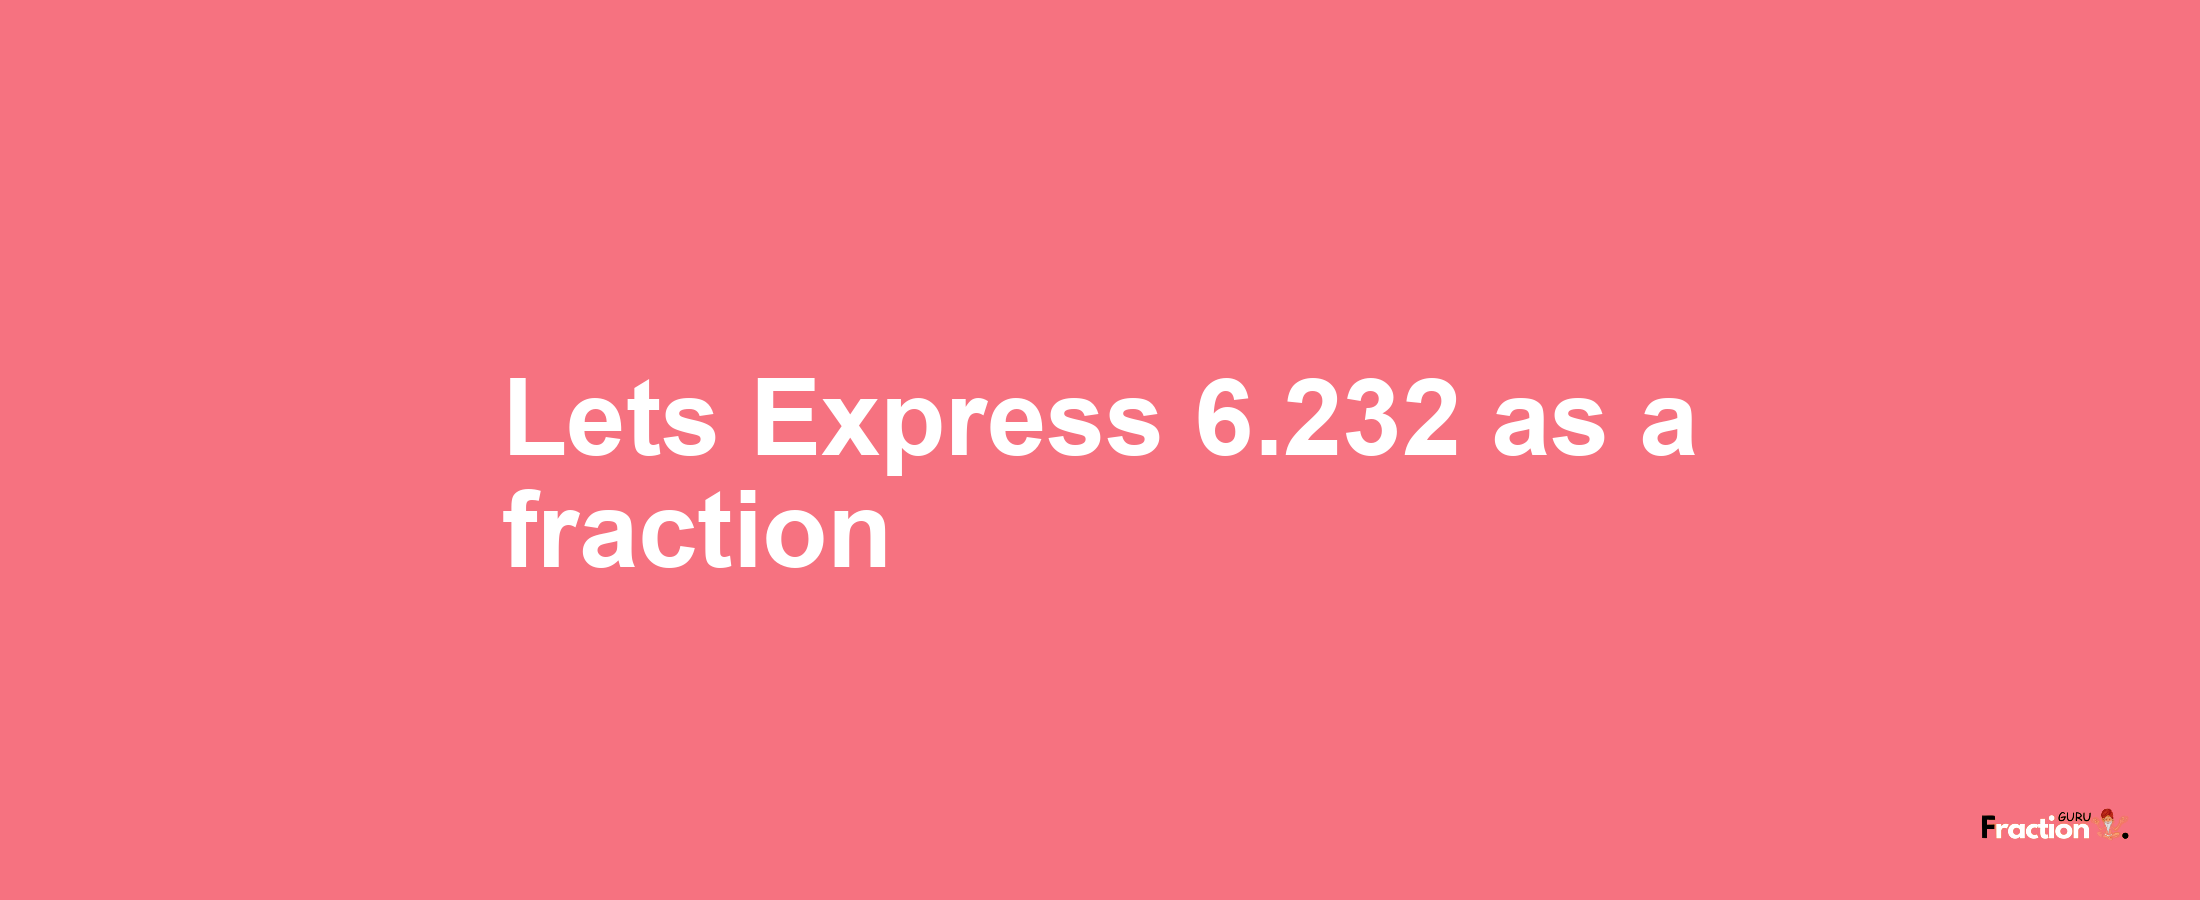 Lets Express 6.232 as afraction